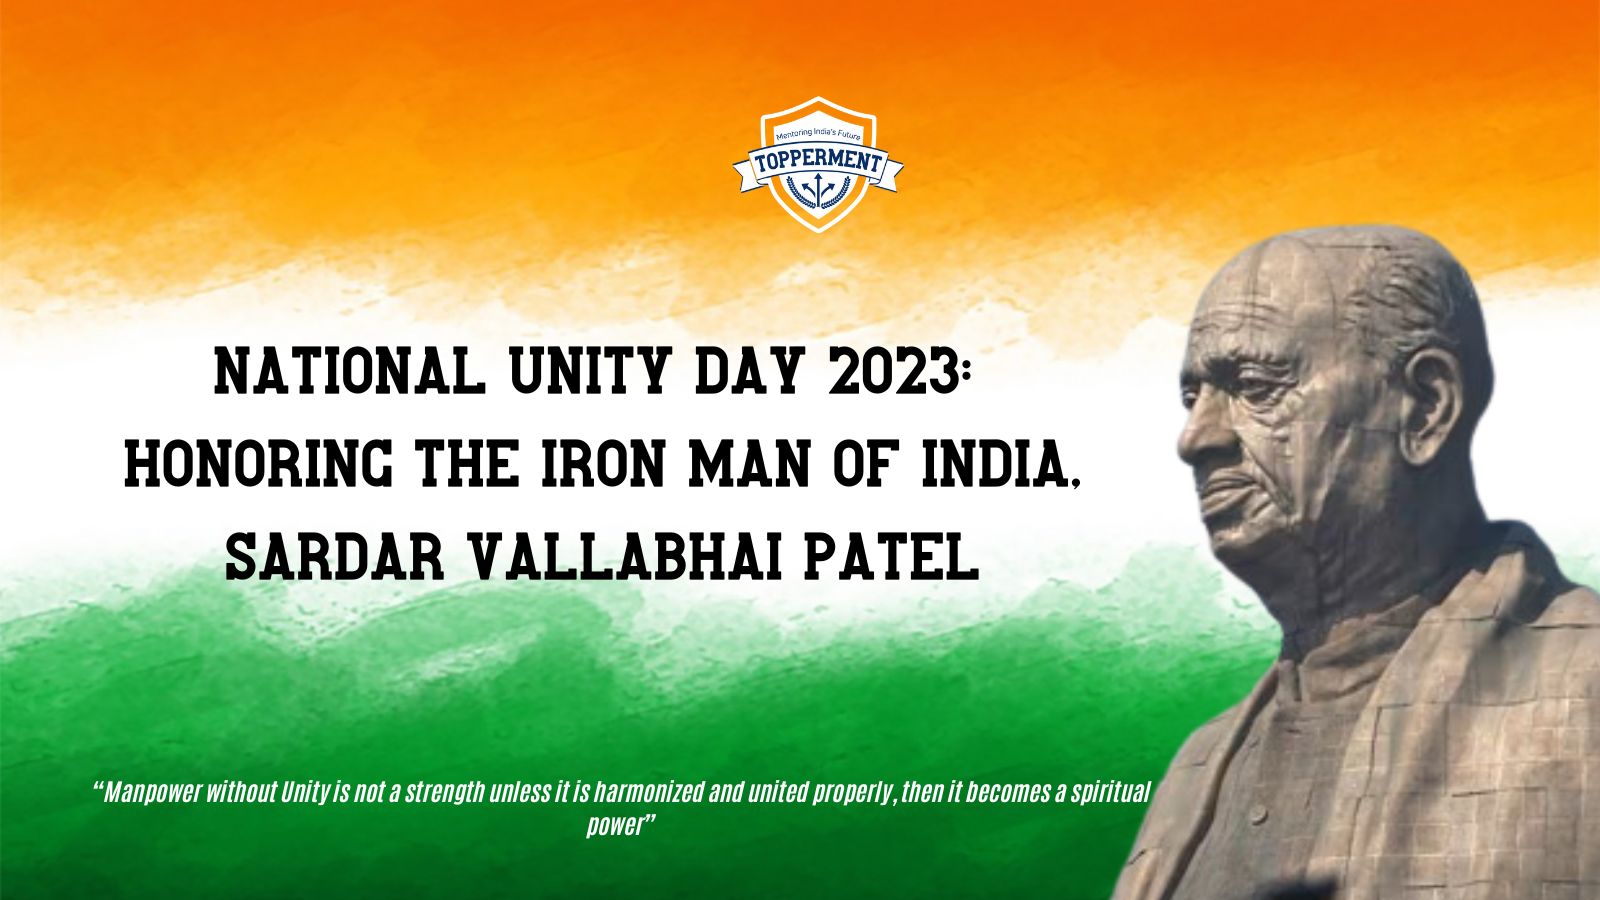 National-Unity-Day-2023-Celebrating-the-Legacy-of-Sardar-Vallabhai-Patel-Best-UPSC-IAS-Coaching-For-Mentorship-And-Guidance